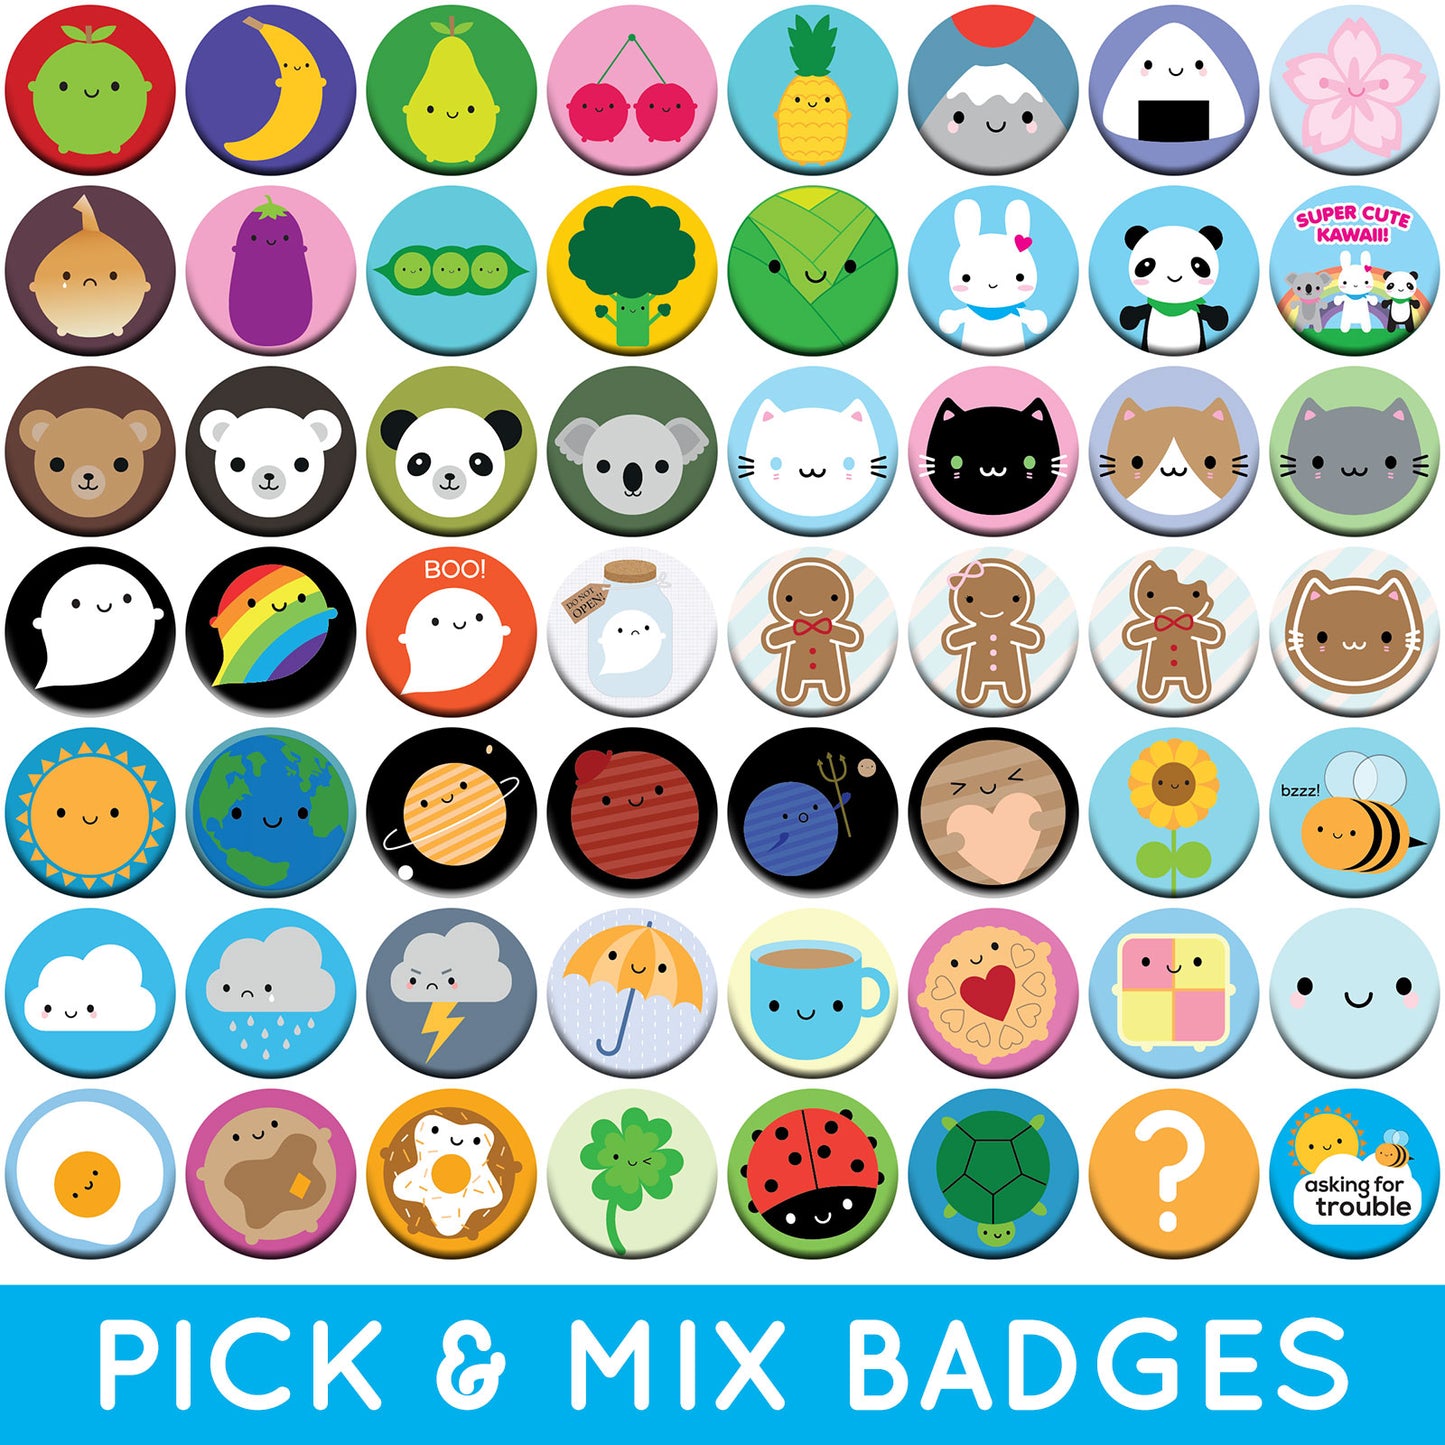 All available badge designs 